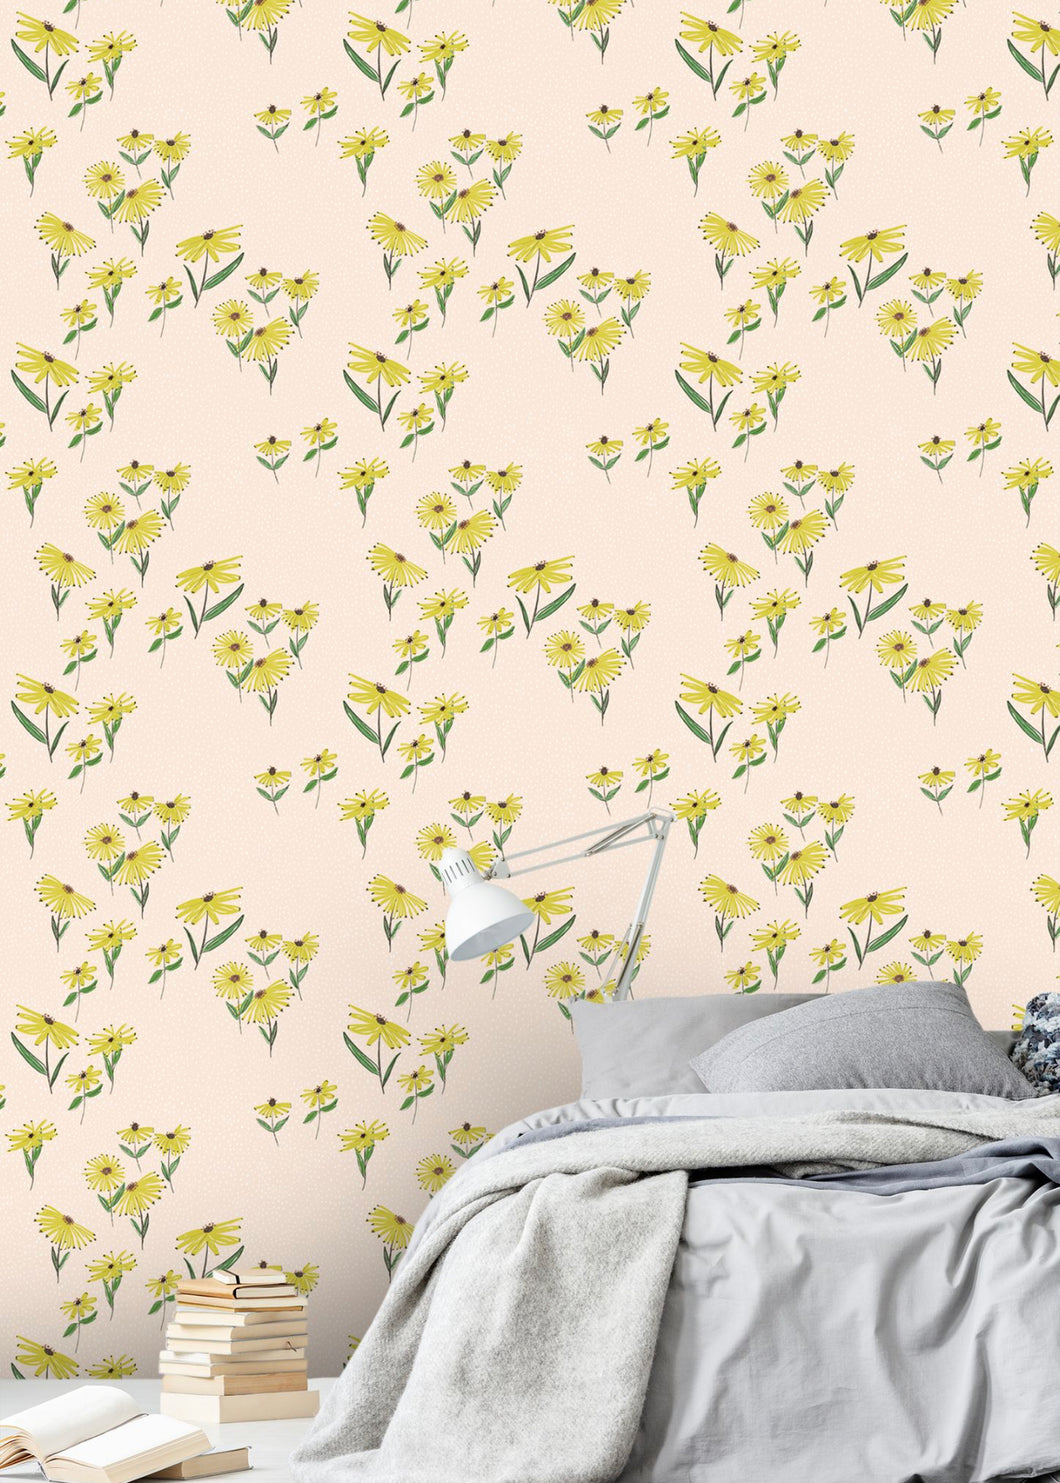 Daisy Patch | Removable PhotoTex Wallpaper